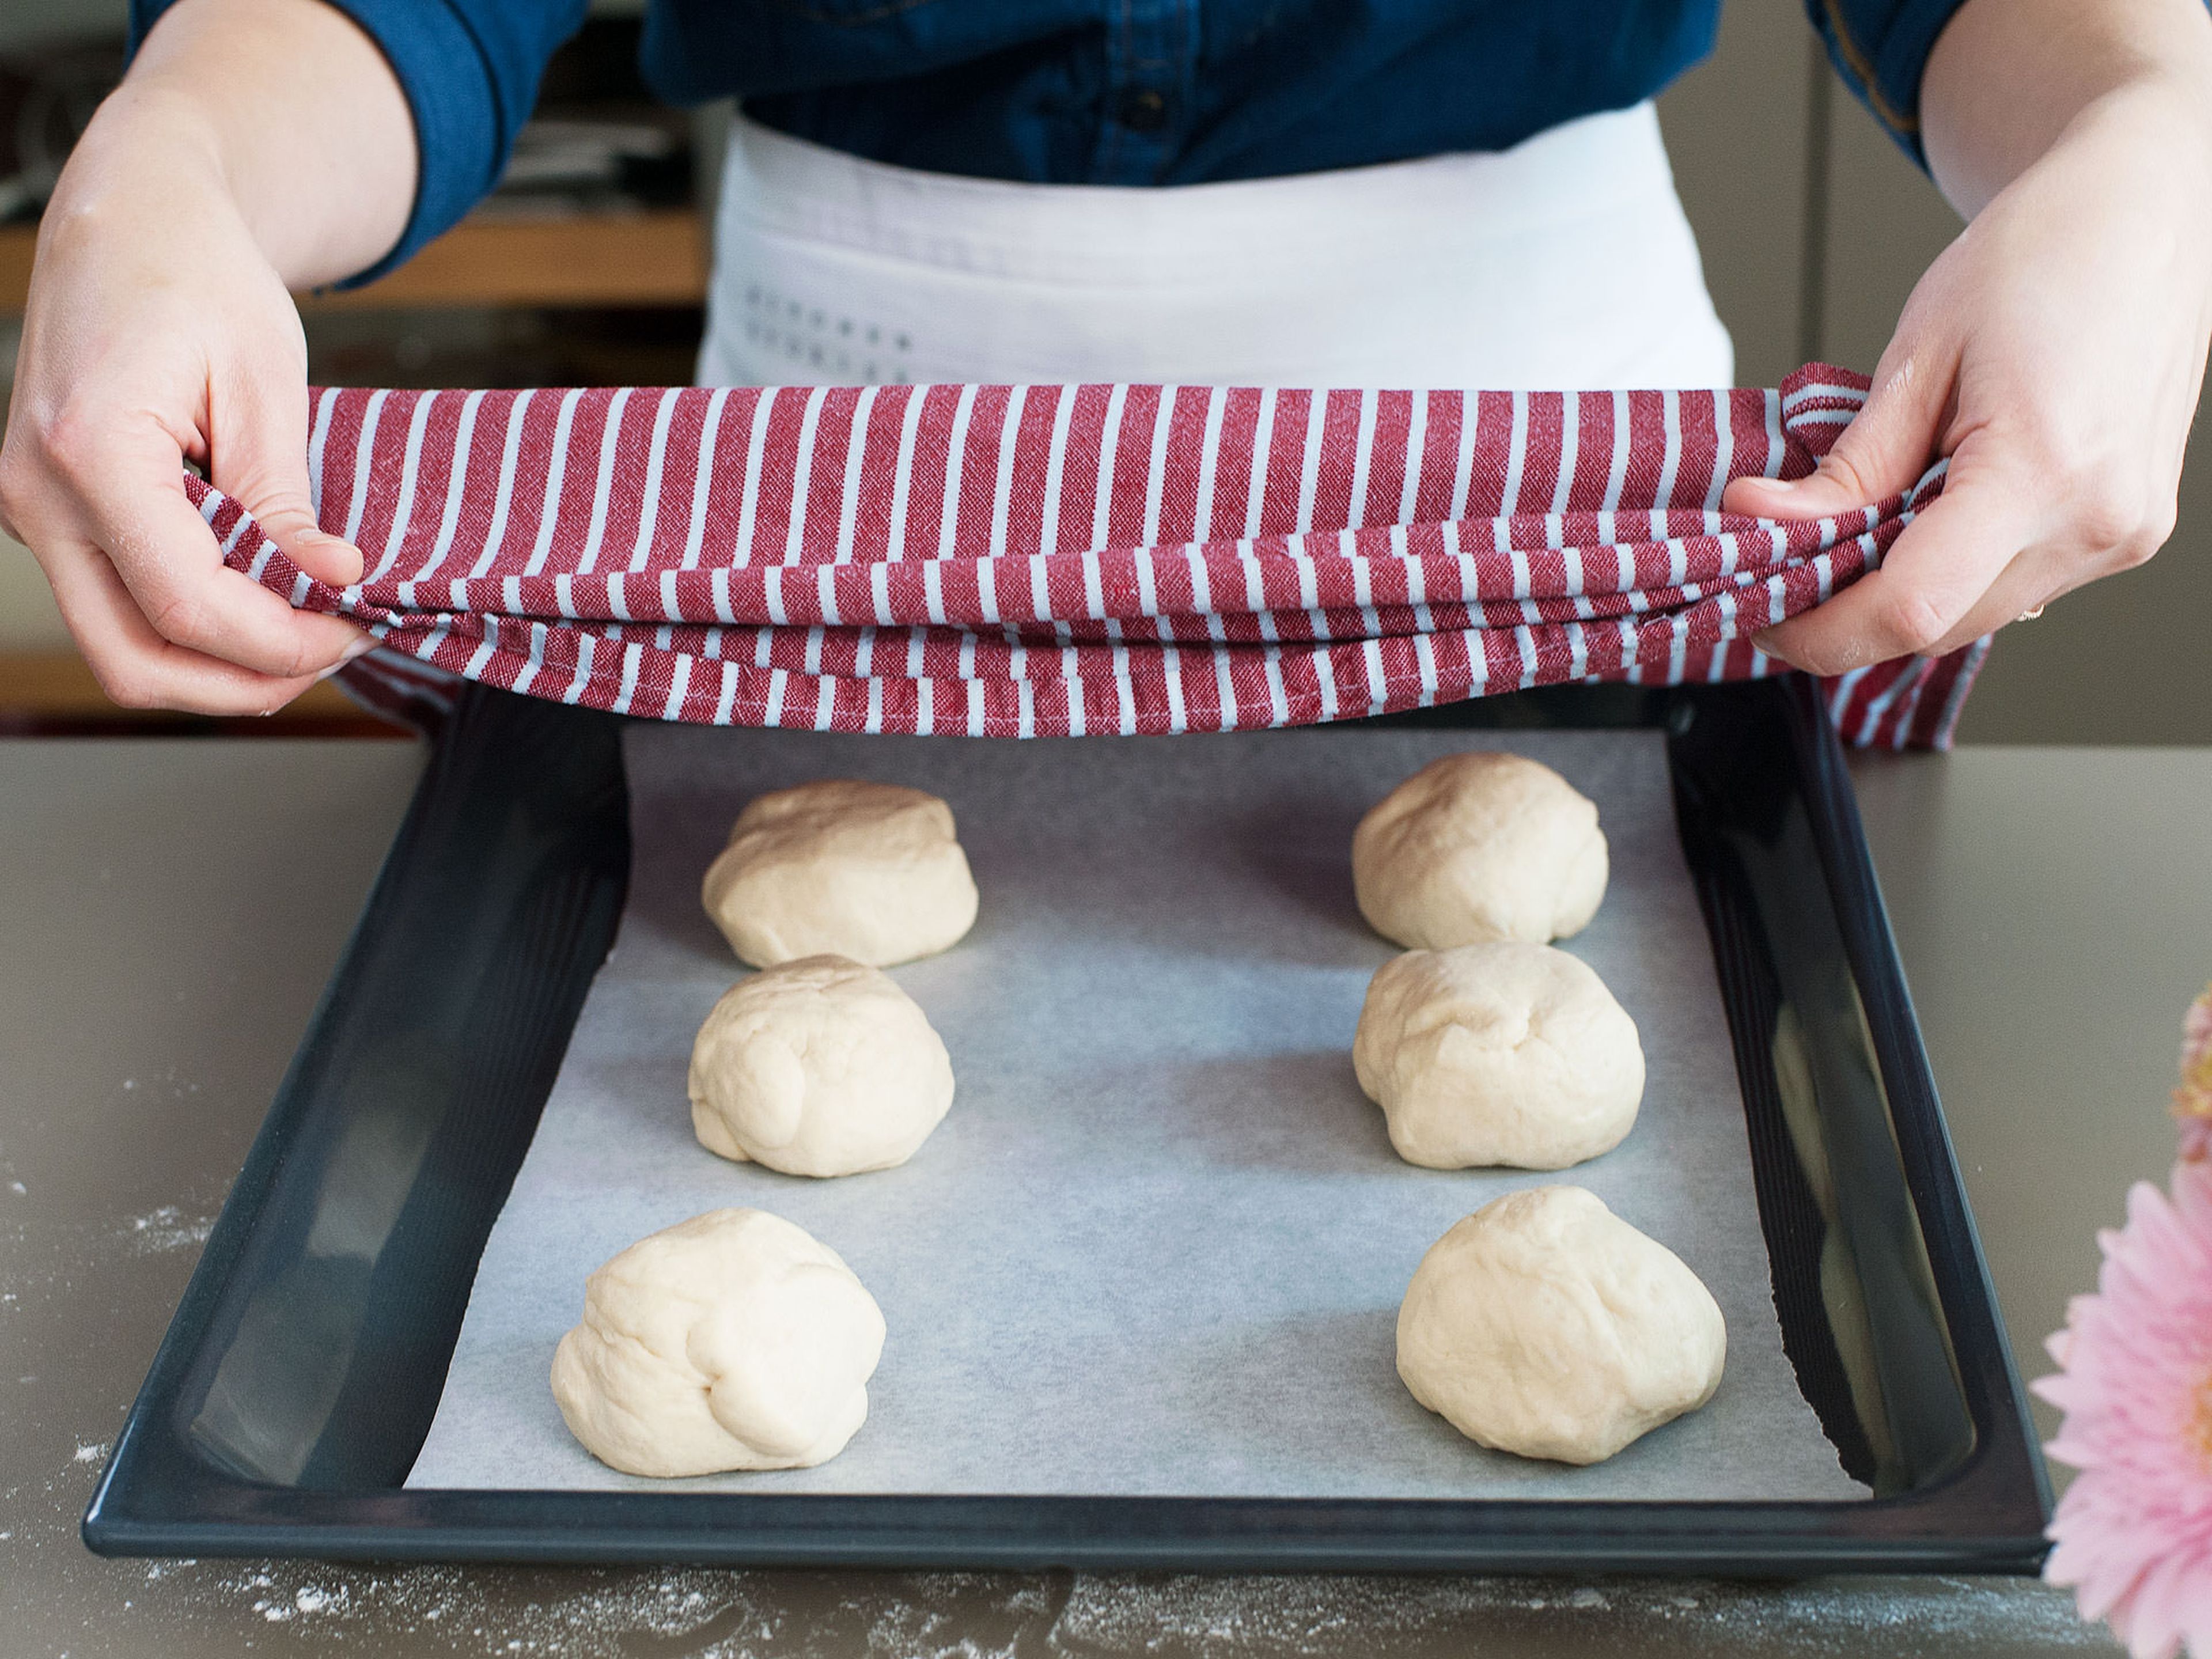 Knead dough briefly, divide into portions, transfer to a parchment-lined baking sheet, cover with a damp towel, and let rise for another 10 min. in a warm place. Alternatively, let rise in oven at 35°C/95°F (upper and lower heat) or without towel in automated program “yeast dough."